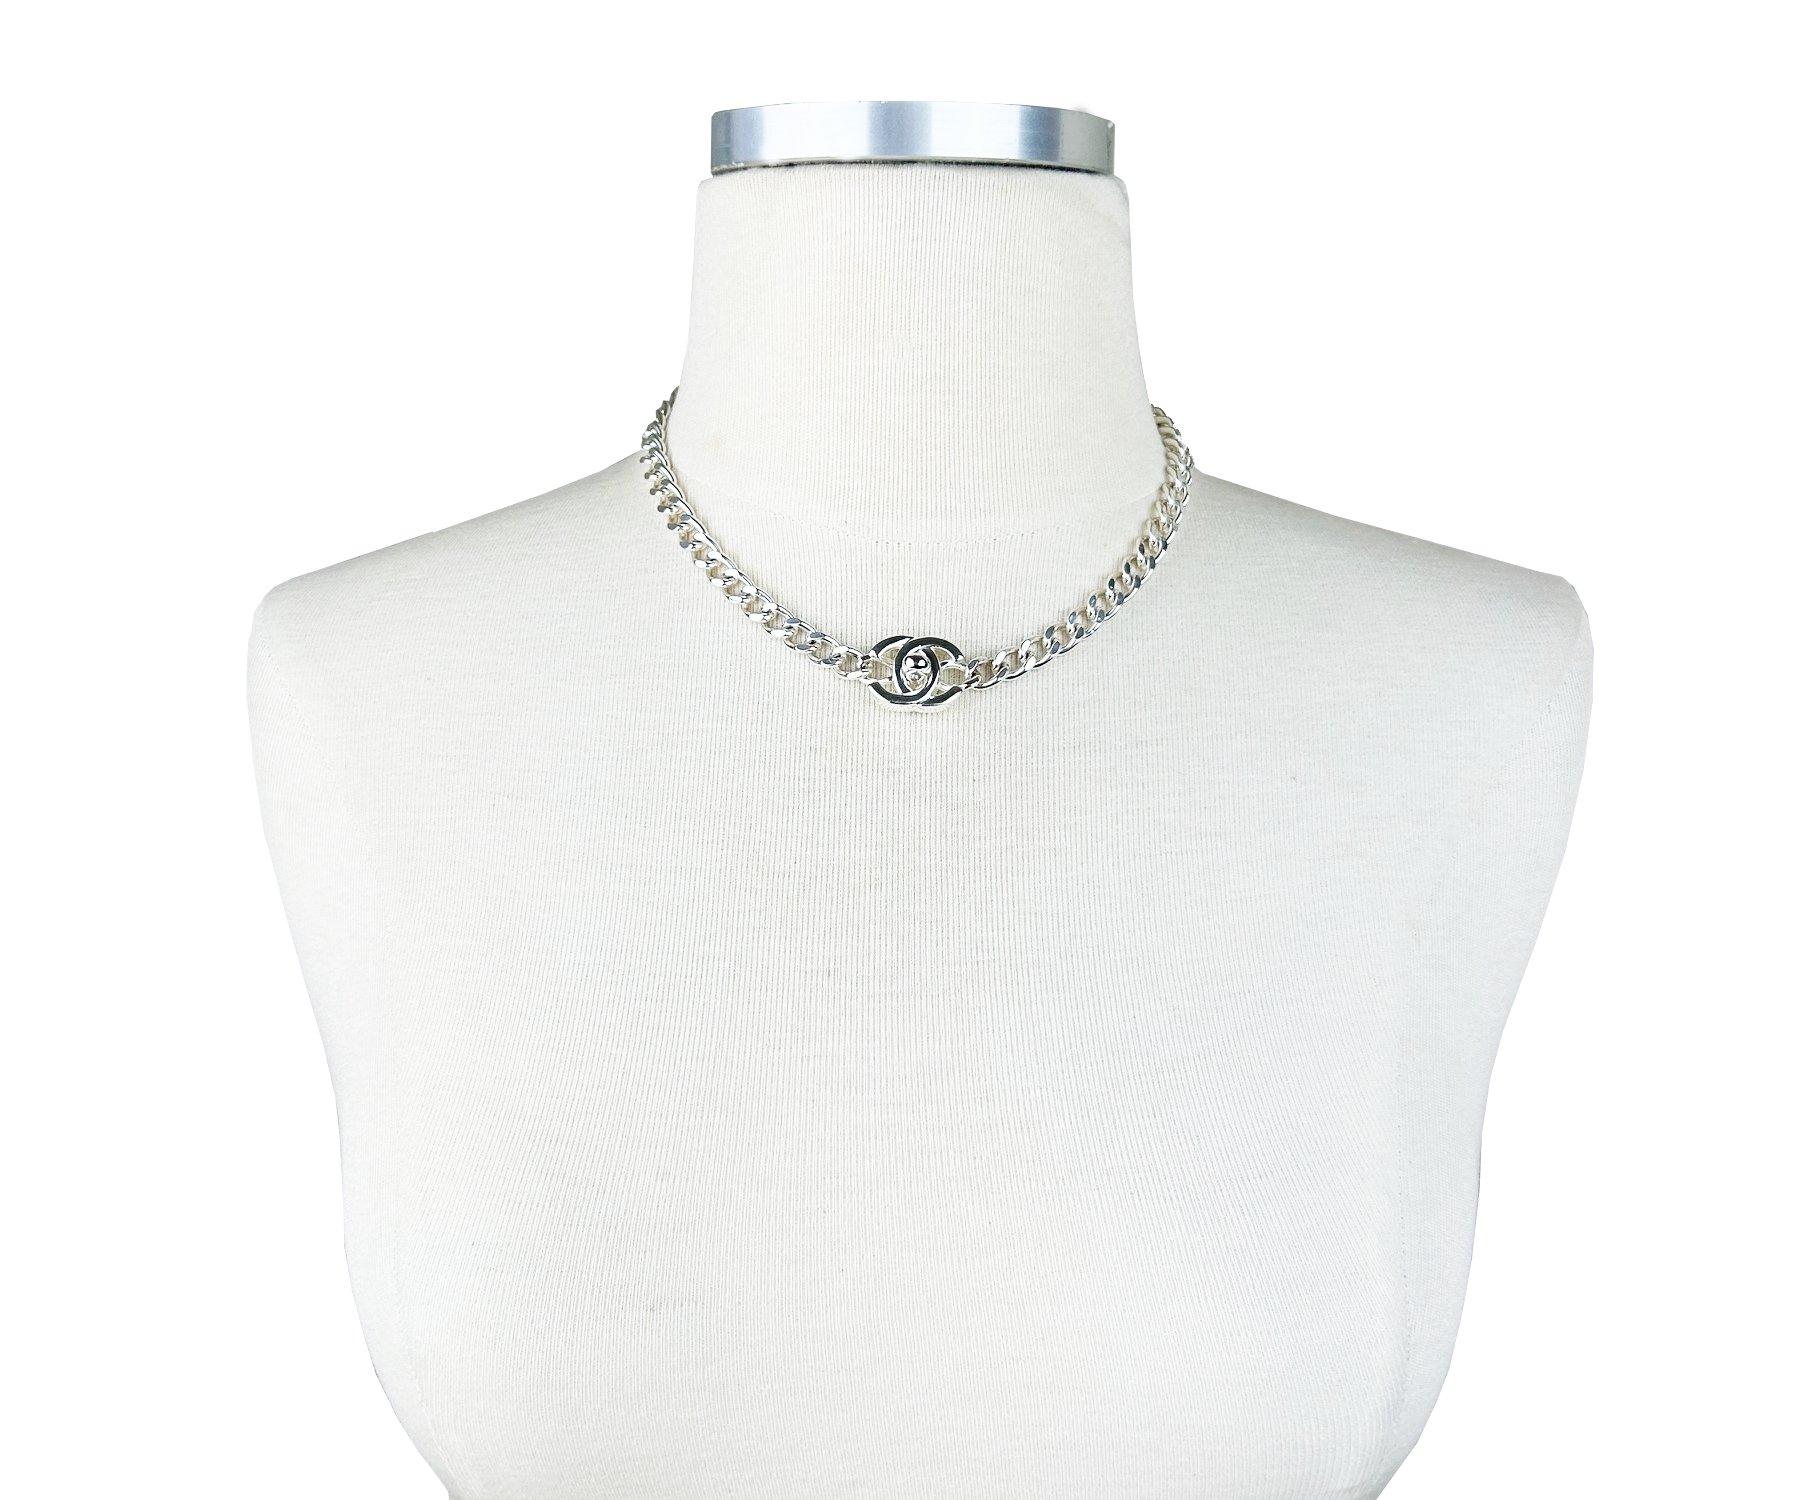 Artisan Chanel Rare Vintage 96 Silver CC Small Turnlock Chain Necklace  For Sale